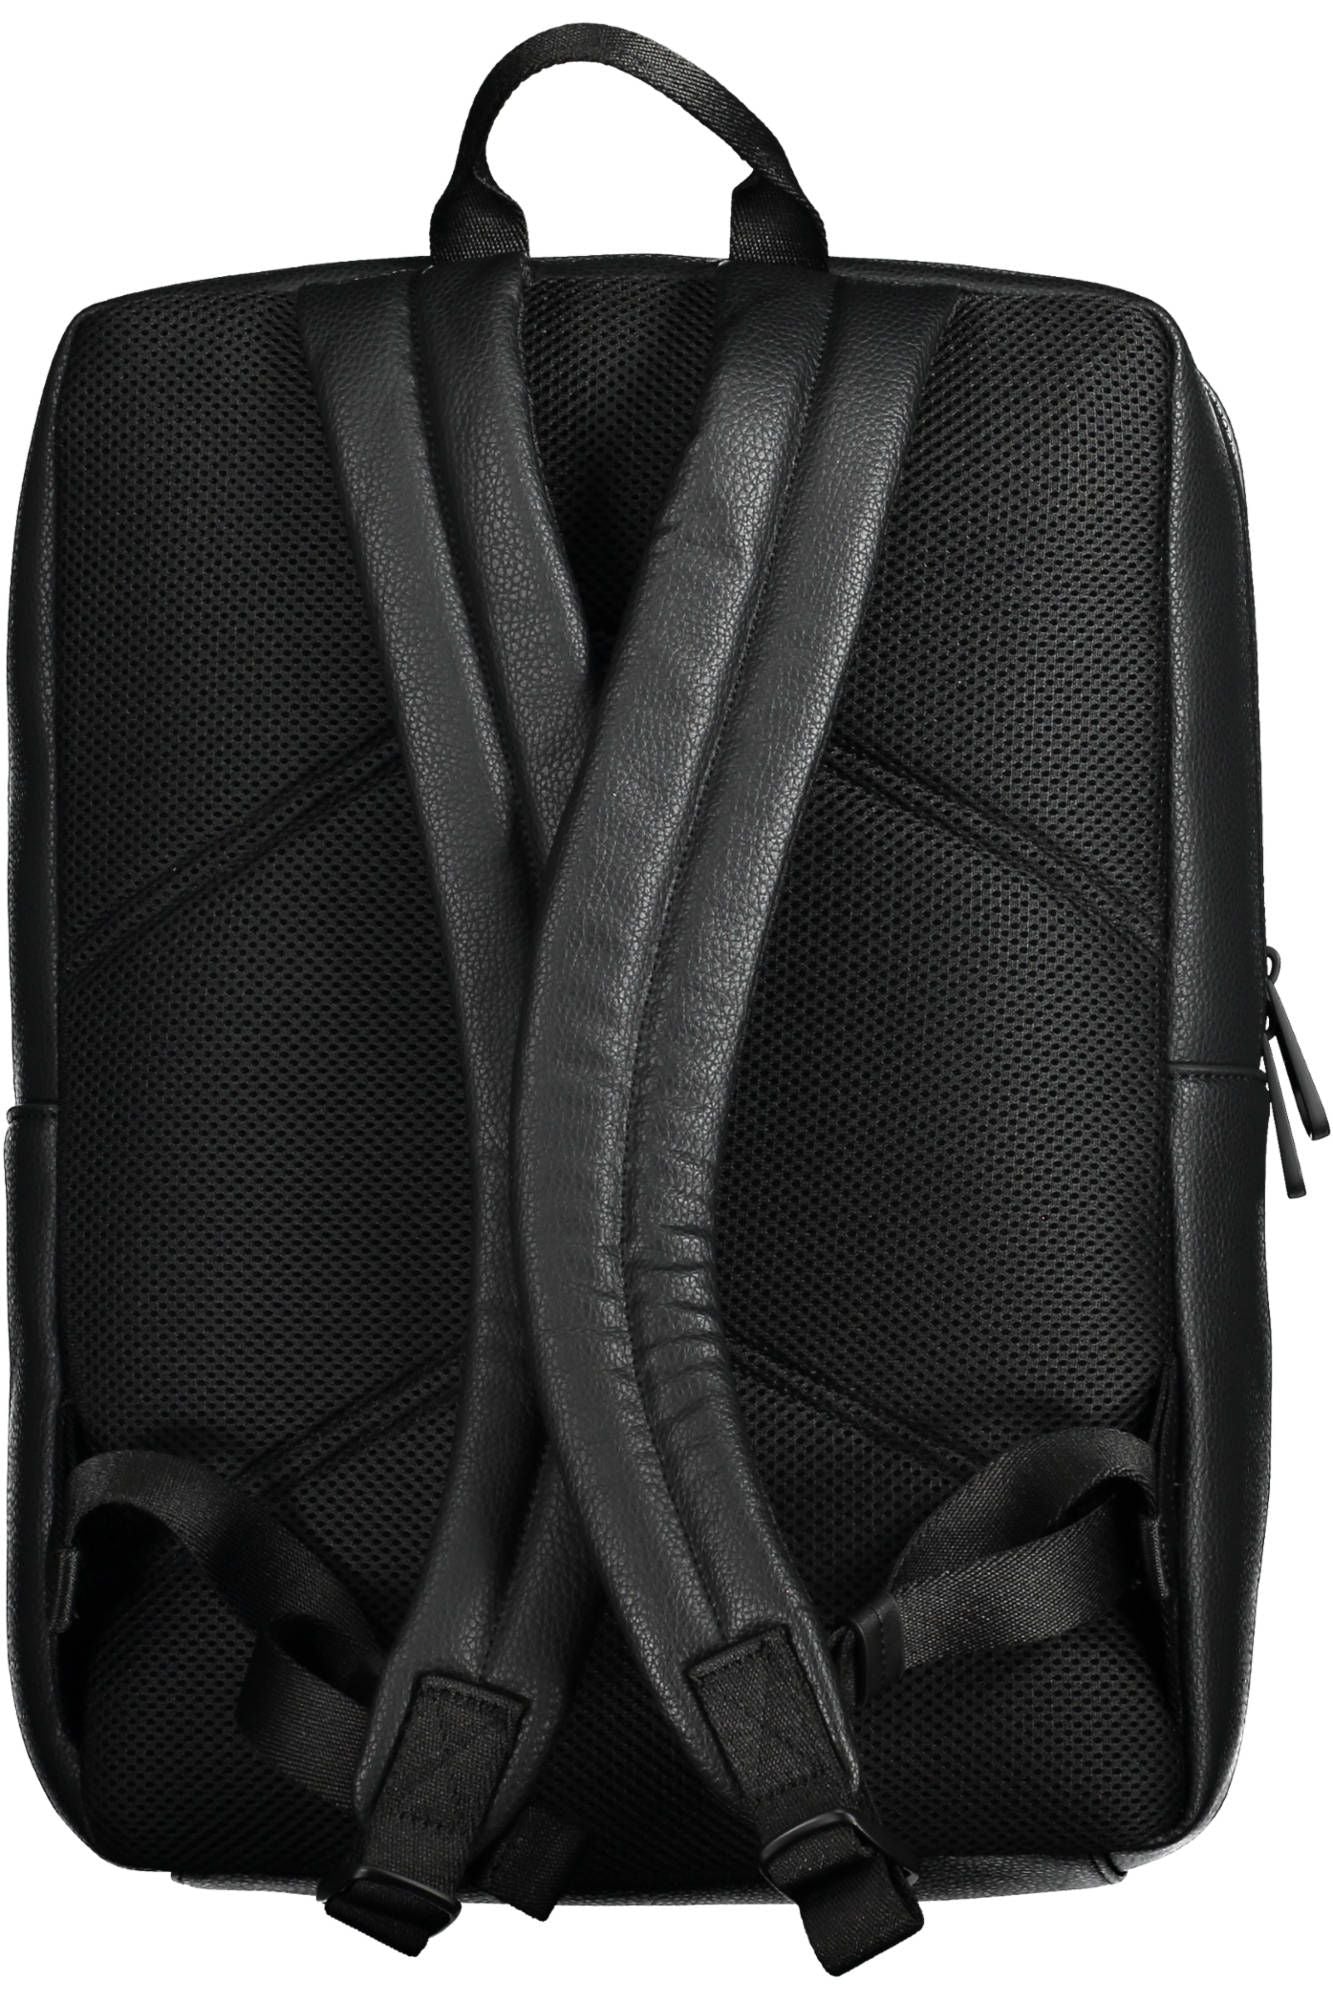 Sleek Urban Backpack with Recycled Materials